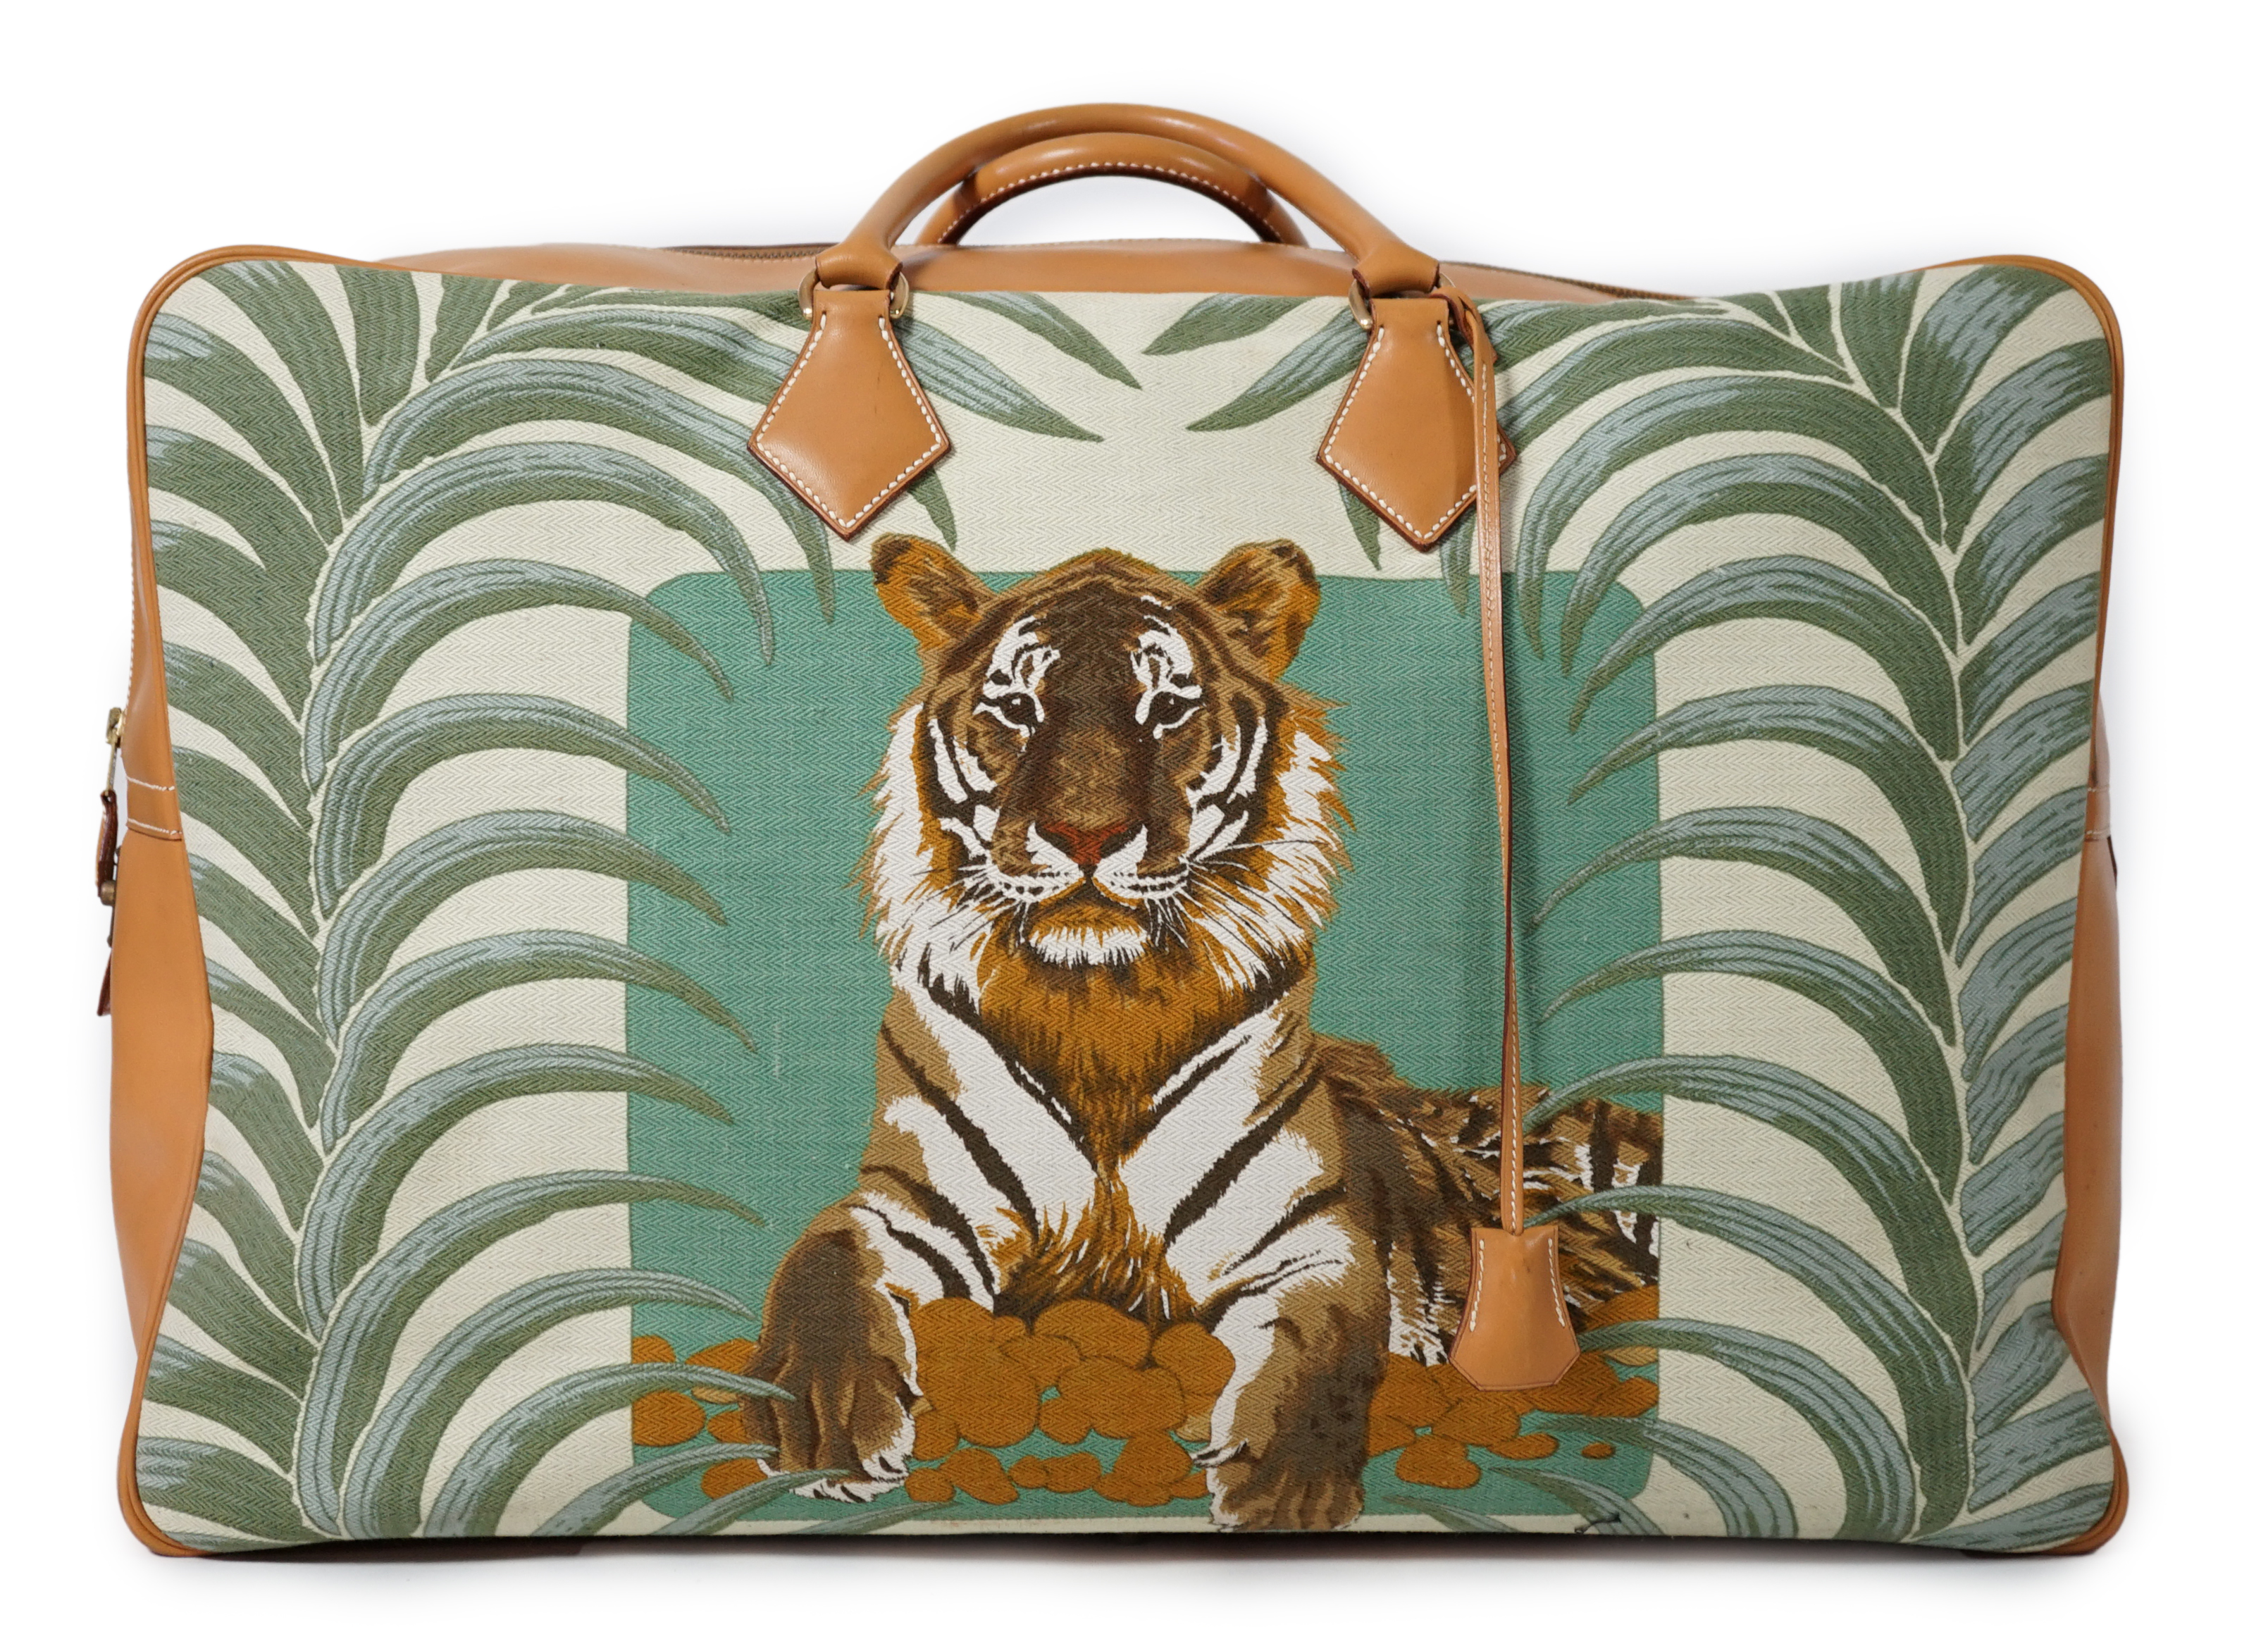 A Hermès Royal Tiger Plume 60 travel bag in leather and linen, height 37cm, width 57cm, depth 22cm